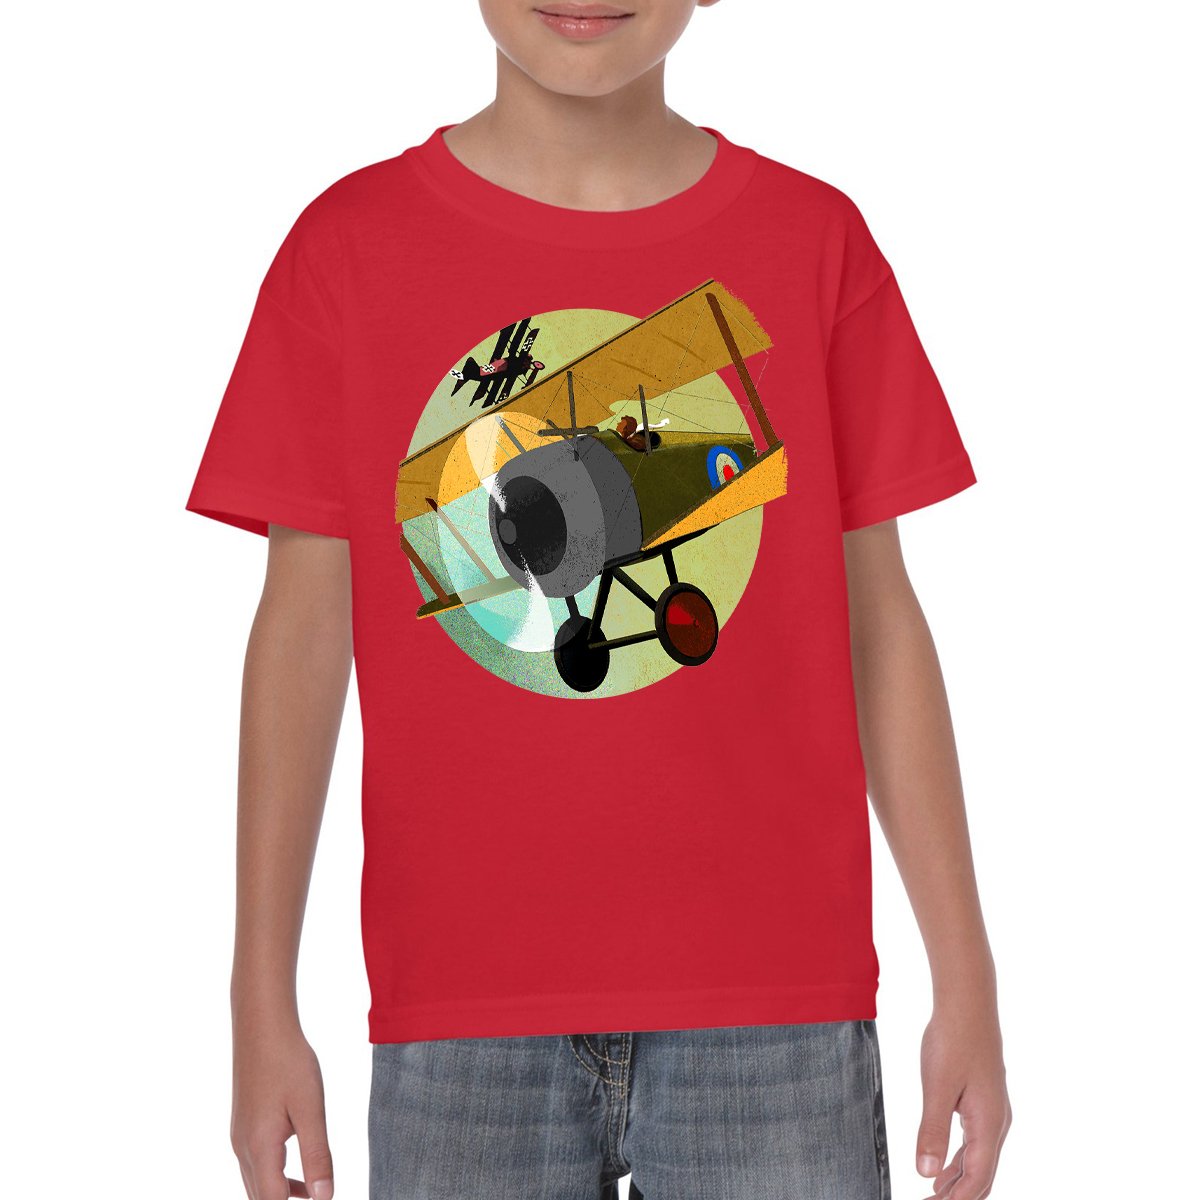 TALLY-HO Youth Semi-Fitted T-Shirt